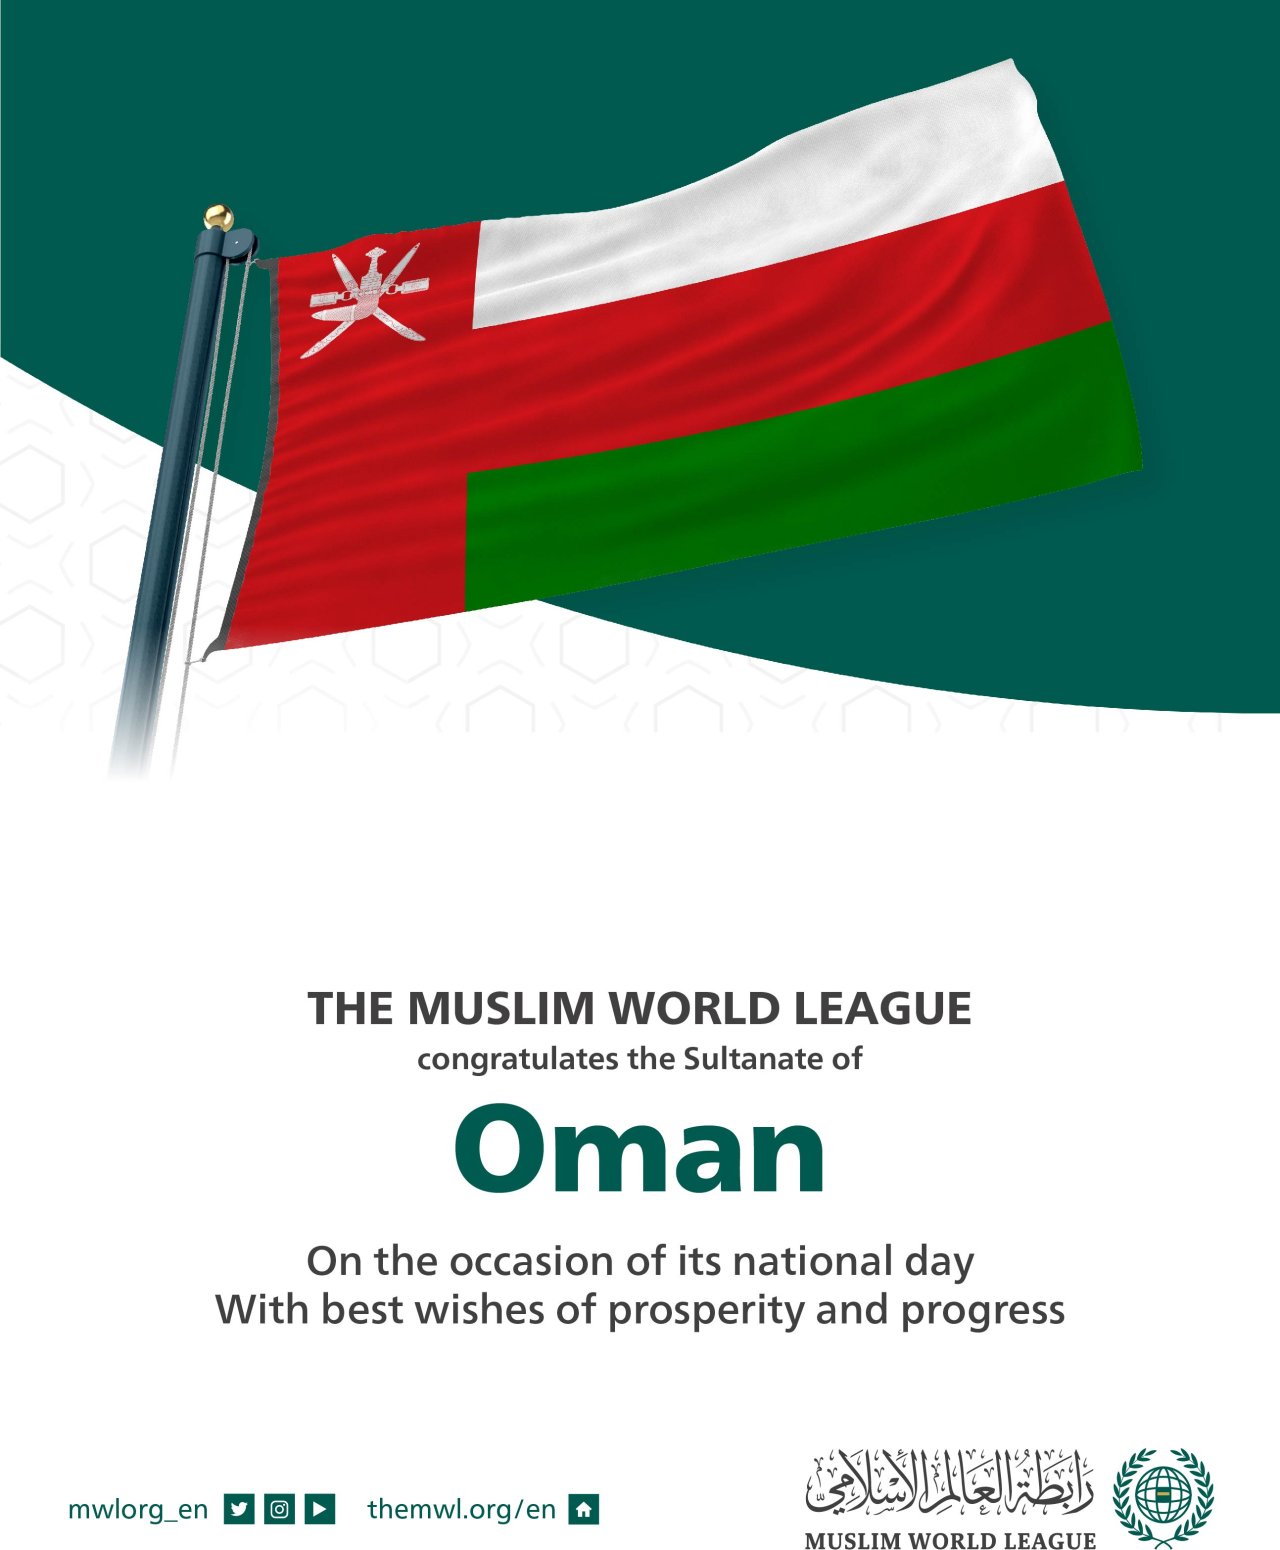 MWL congratulates the Sultanate of Oman on the occasion of its national day.